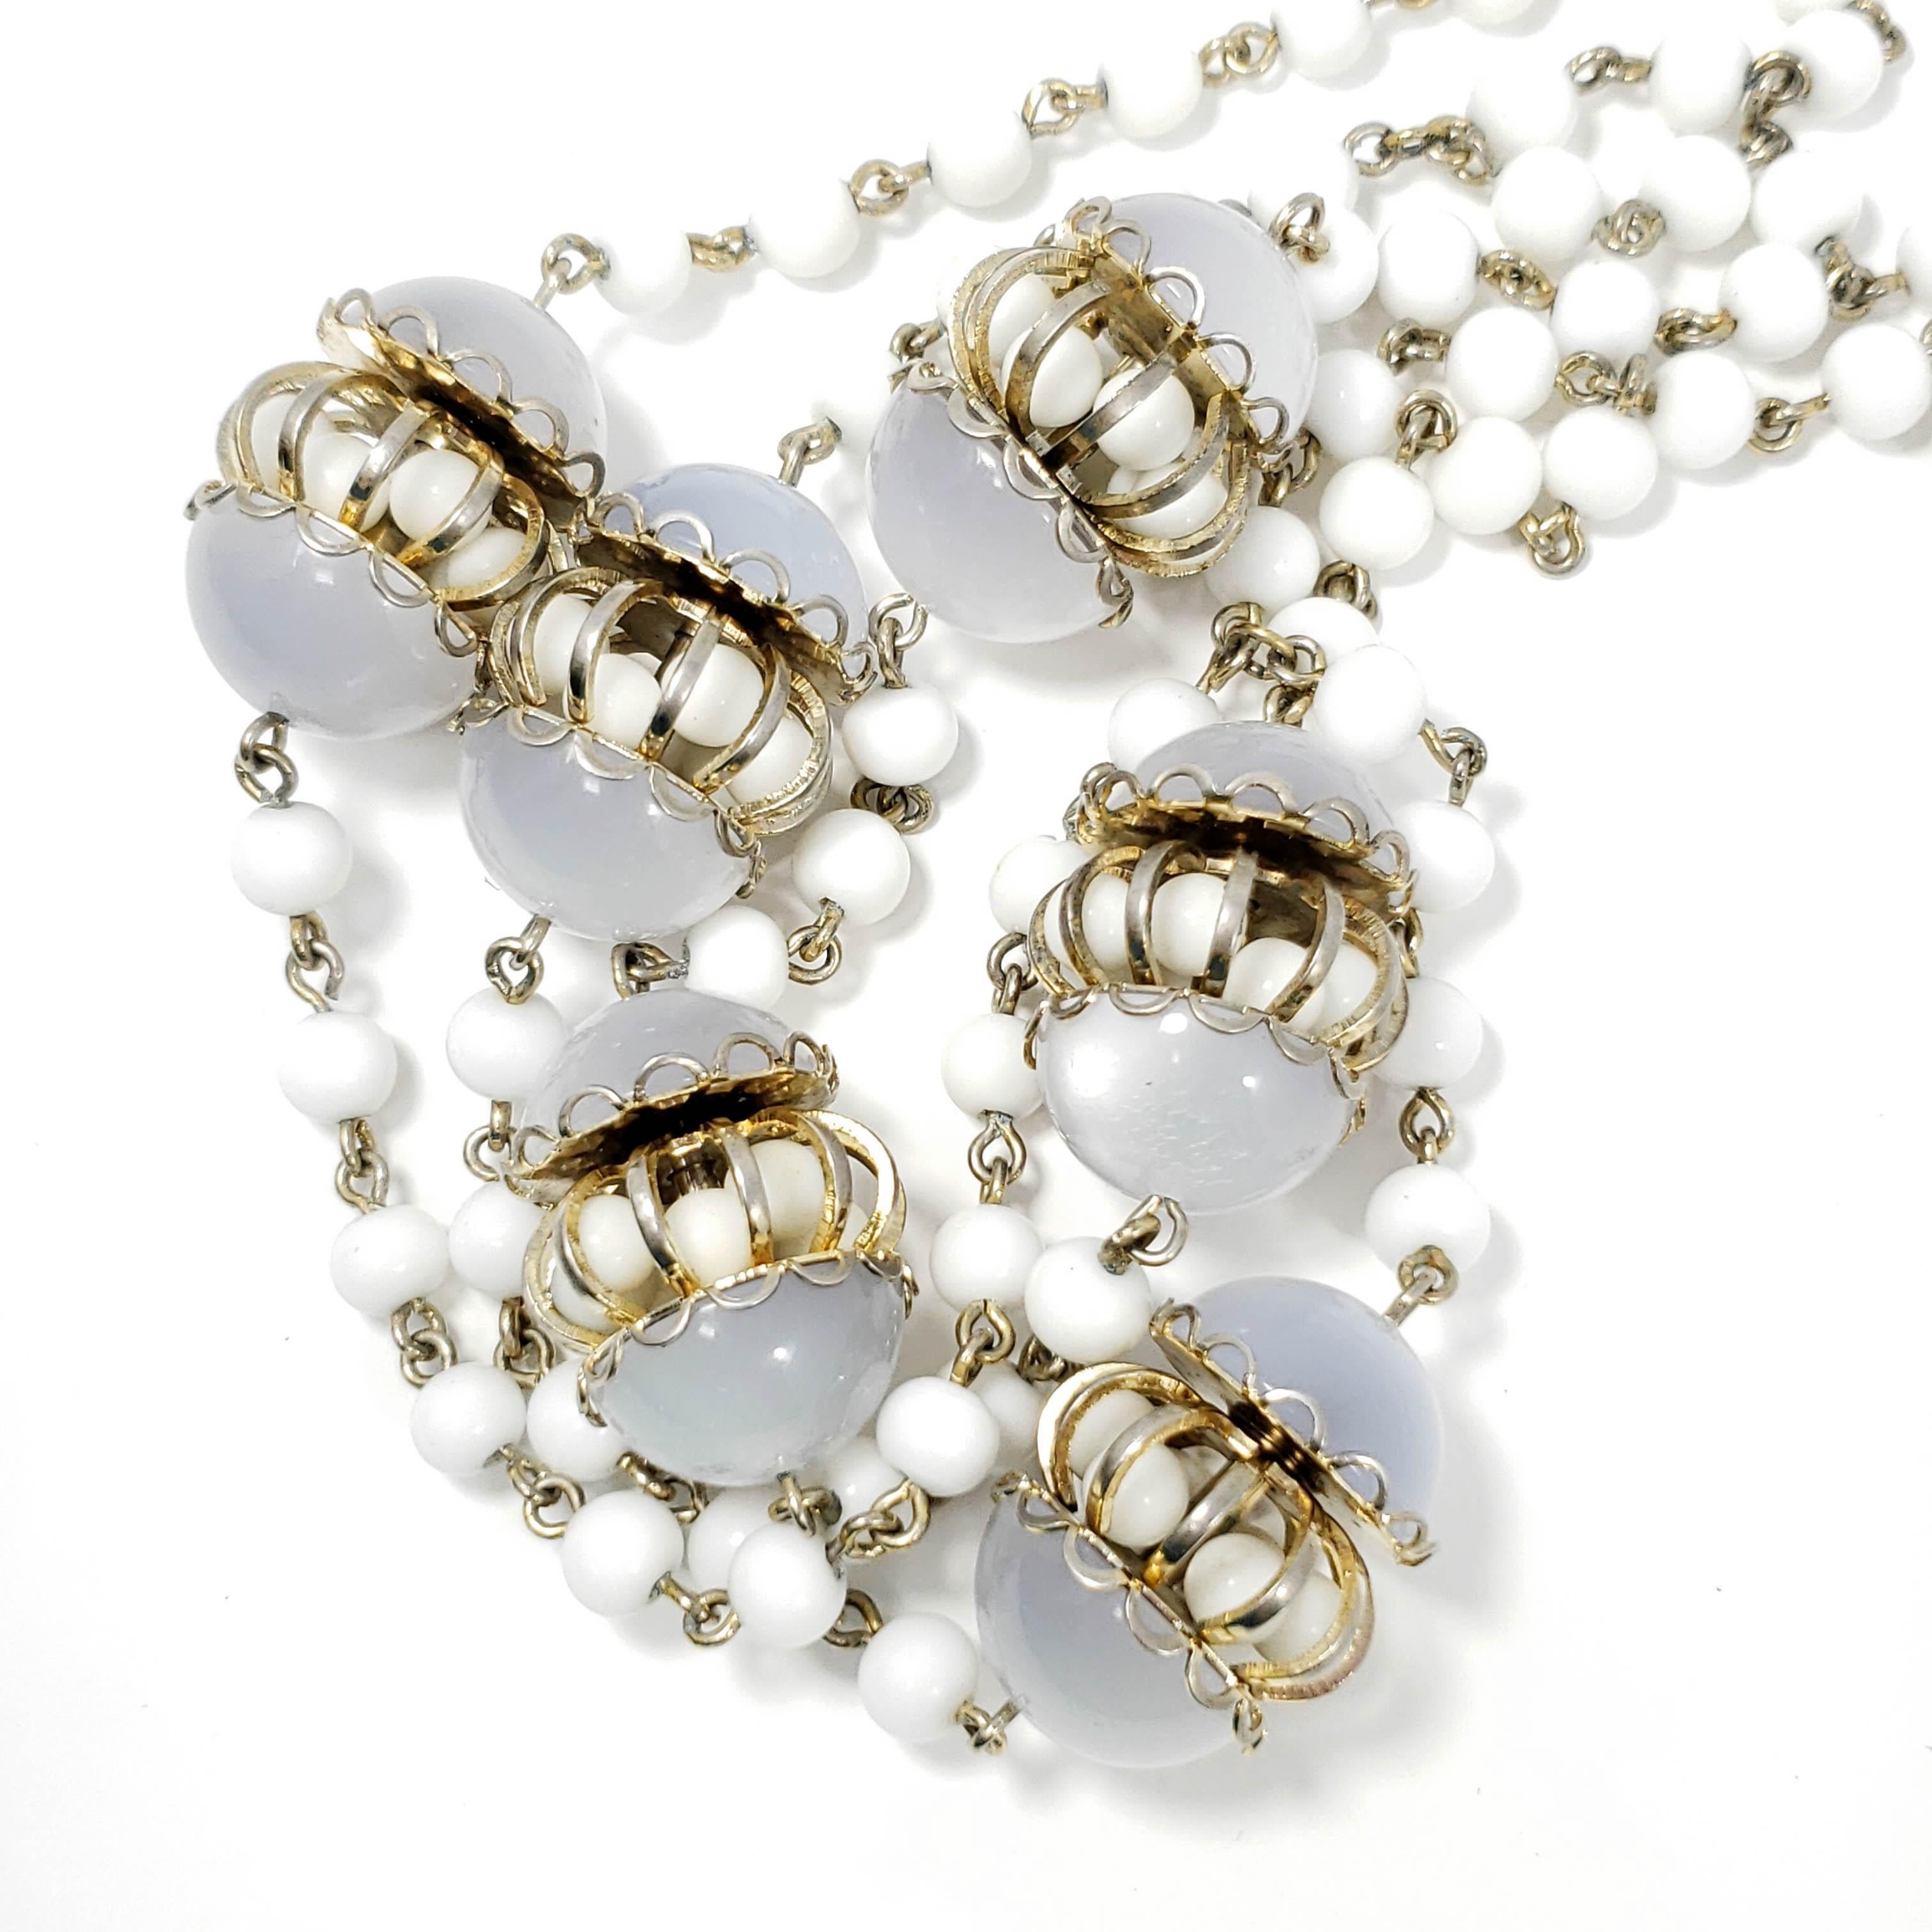 White Moonglow Lucite and Milk Glass Bead Necklace and Dangling Earrings Set In Fair Condition For Sale In Milford, DE